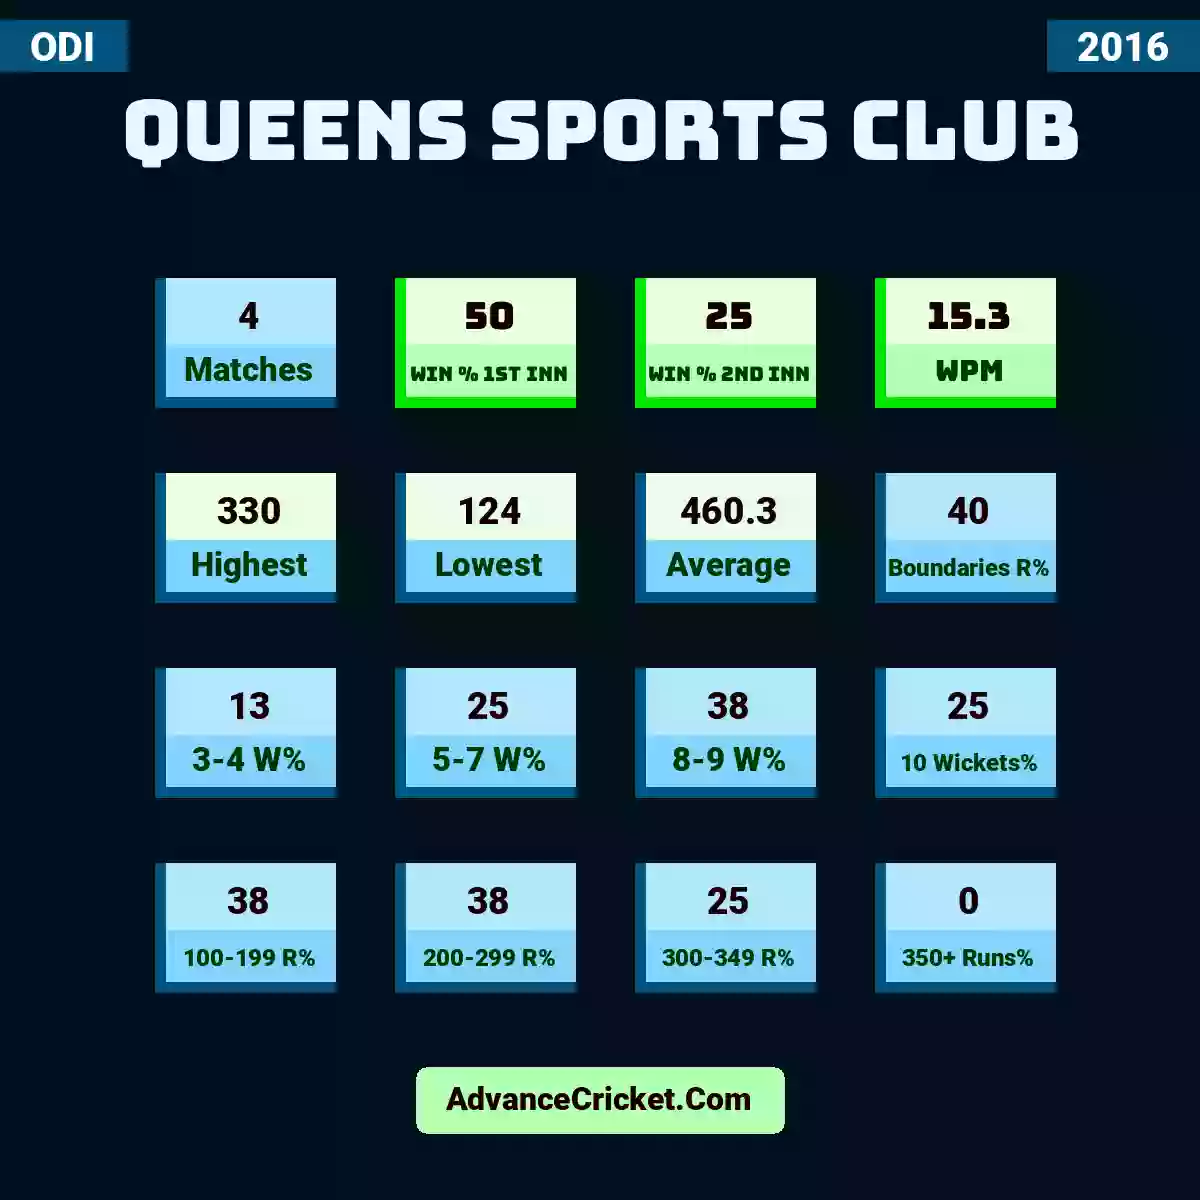 Image showing Queens Sports Club with Matches: 4, Win % 1st Inn: 50, Win % 2nd Inn: 25, WPM: 15.3, Highest: 330, Lowest: 124, Average: 460.3, Boundaries R%: 40, 3-4 W%: 13, 5-7 W%: 25, 8-9 W%: 38, 10 Wickets%: 25, 100-199 R%: 38, 200-299 R%: 38, 300-349 R%: 25, 350+ Runs%: 0.